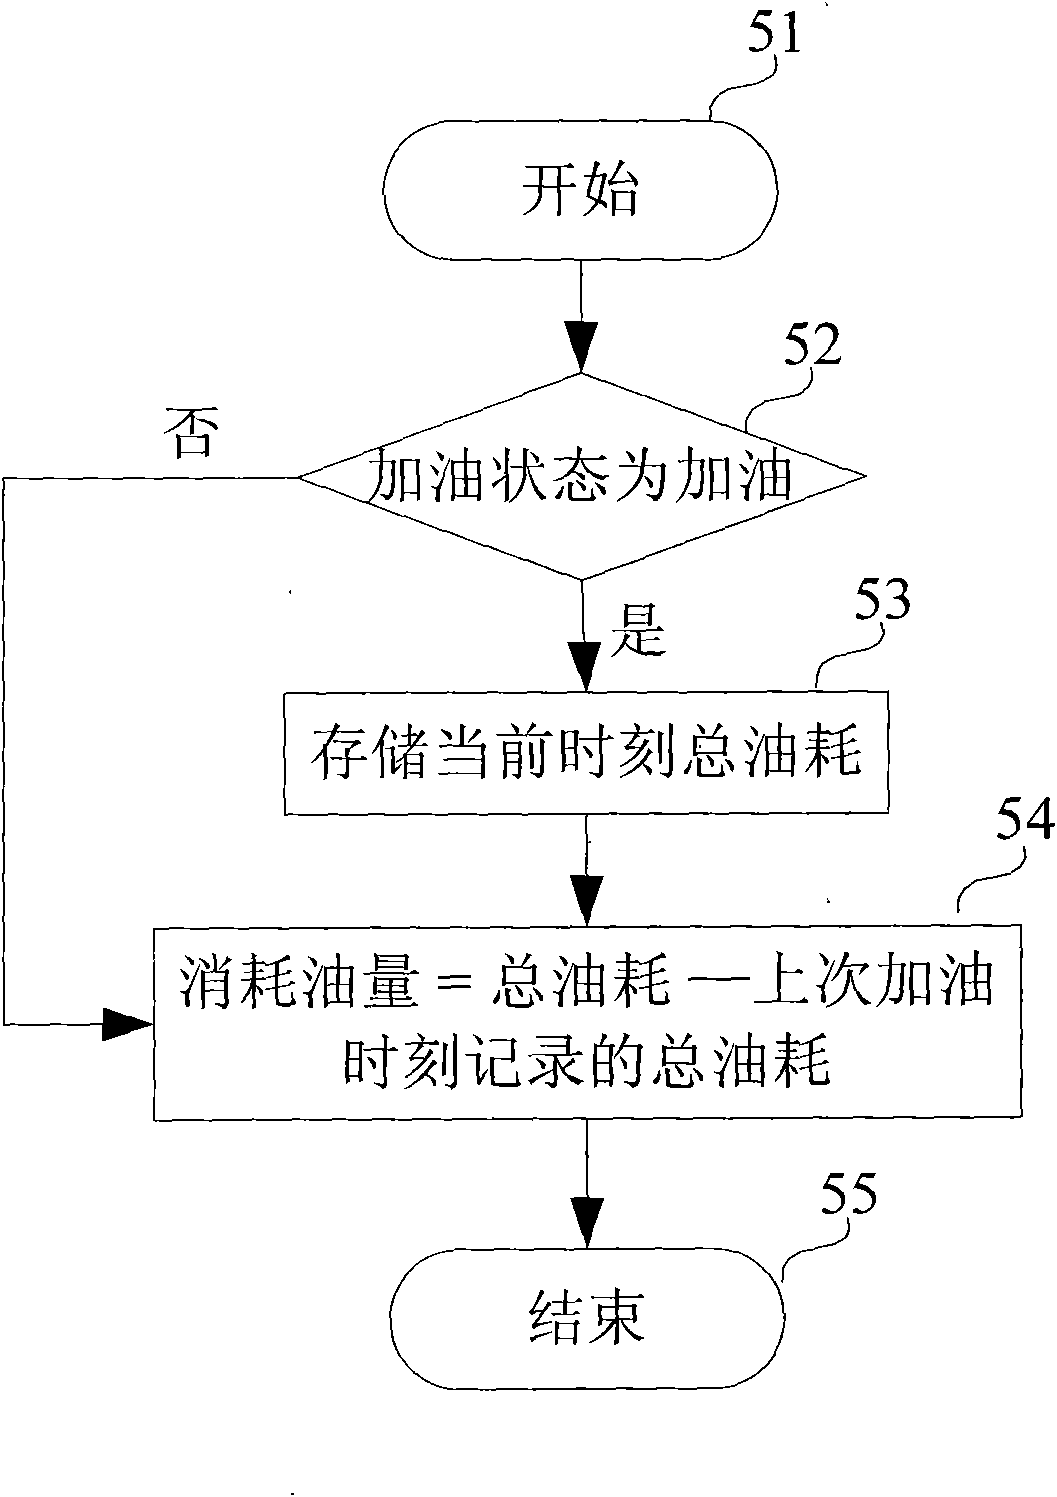 Remaining driving mileage processing method of automobile combination meter